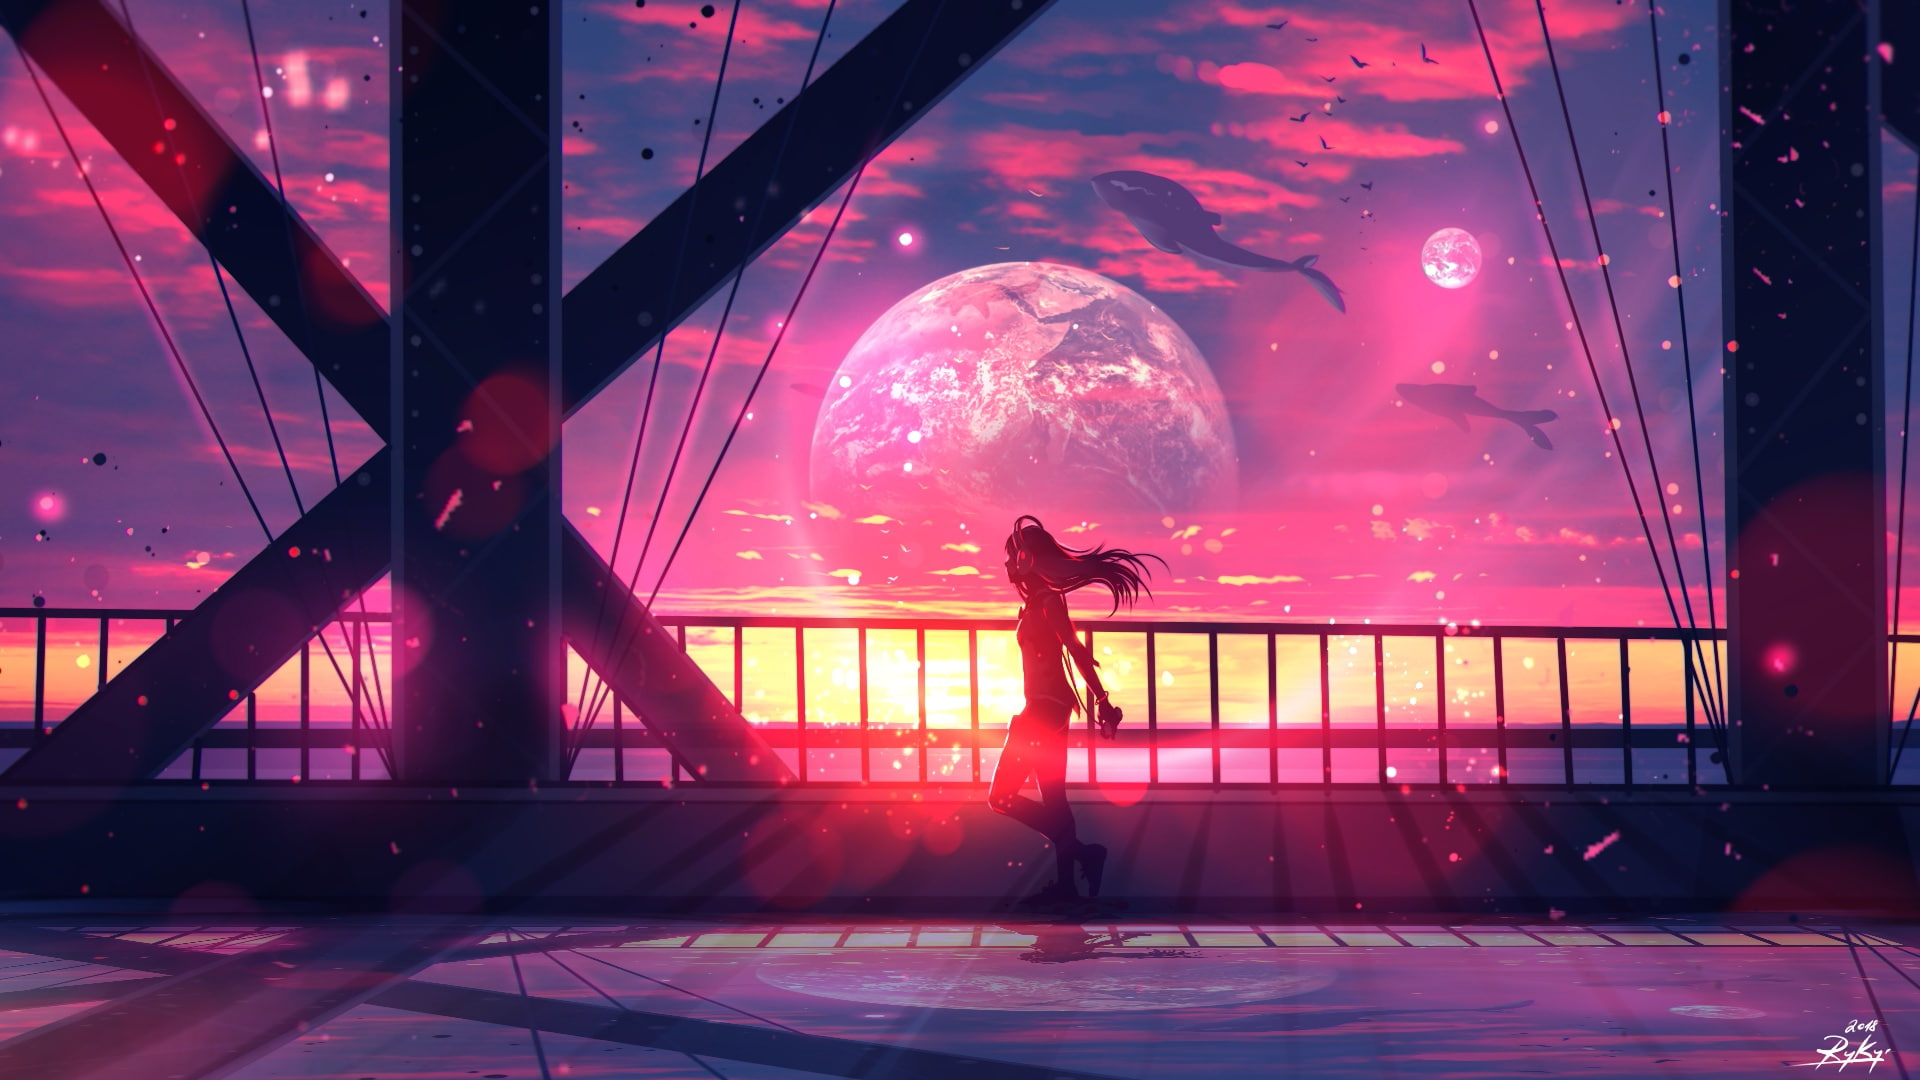 the sky, girl, space, bridge, planet, whales, by ryky